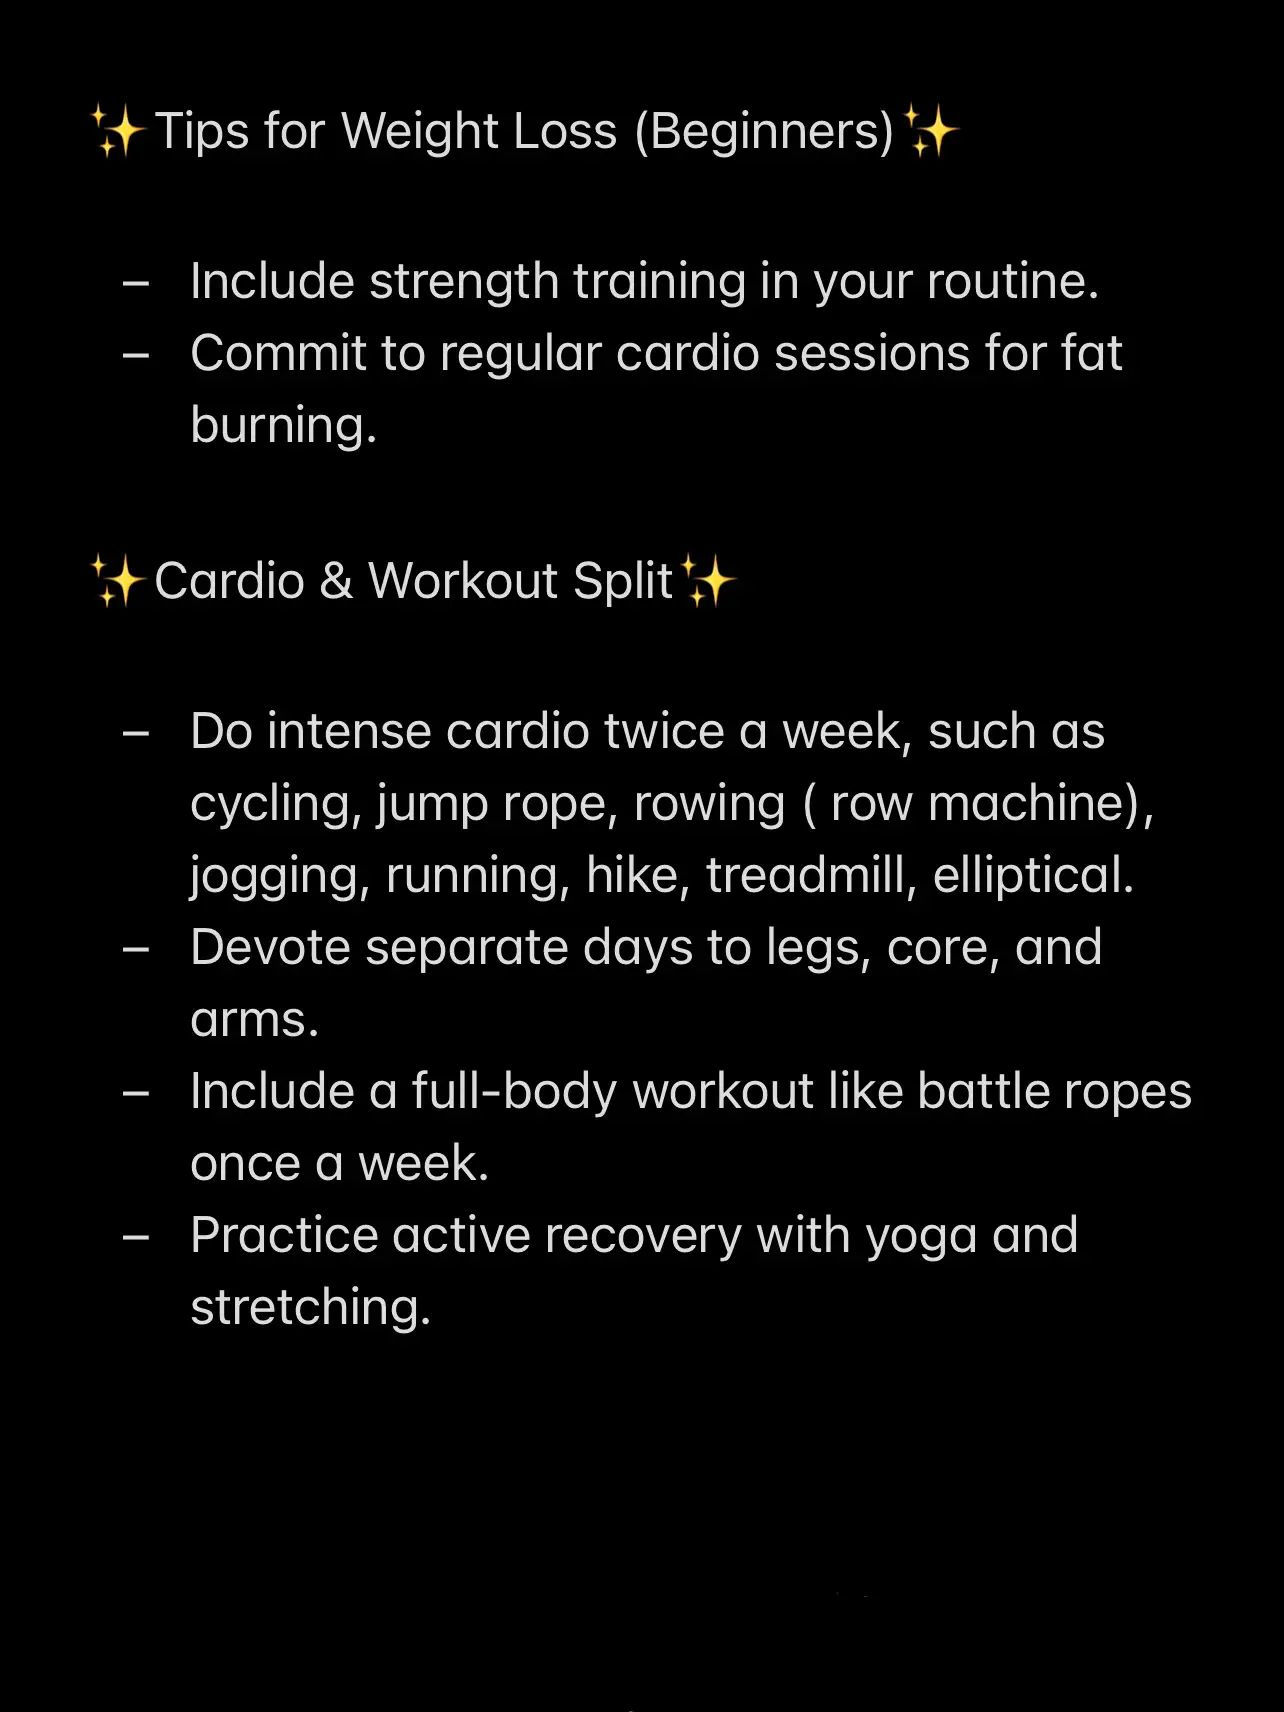 Maximize your muscle recovery! 💪 Remember to listen to your body